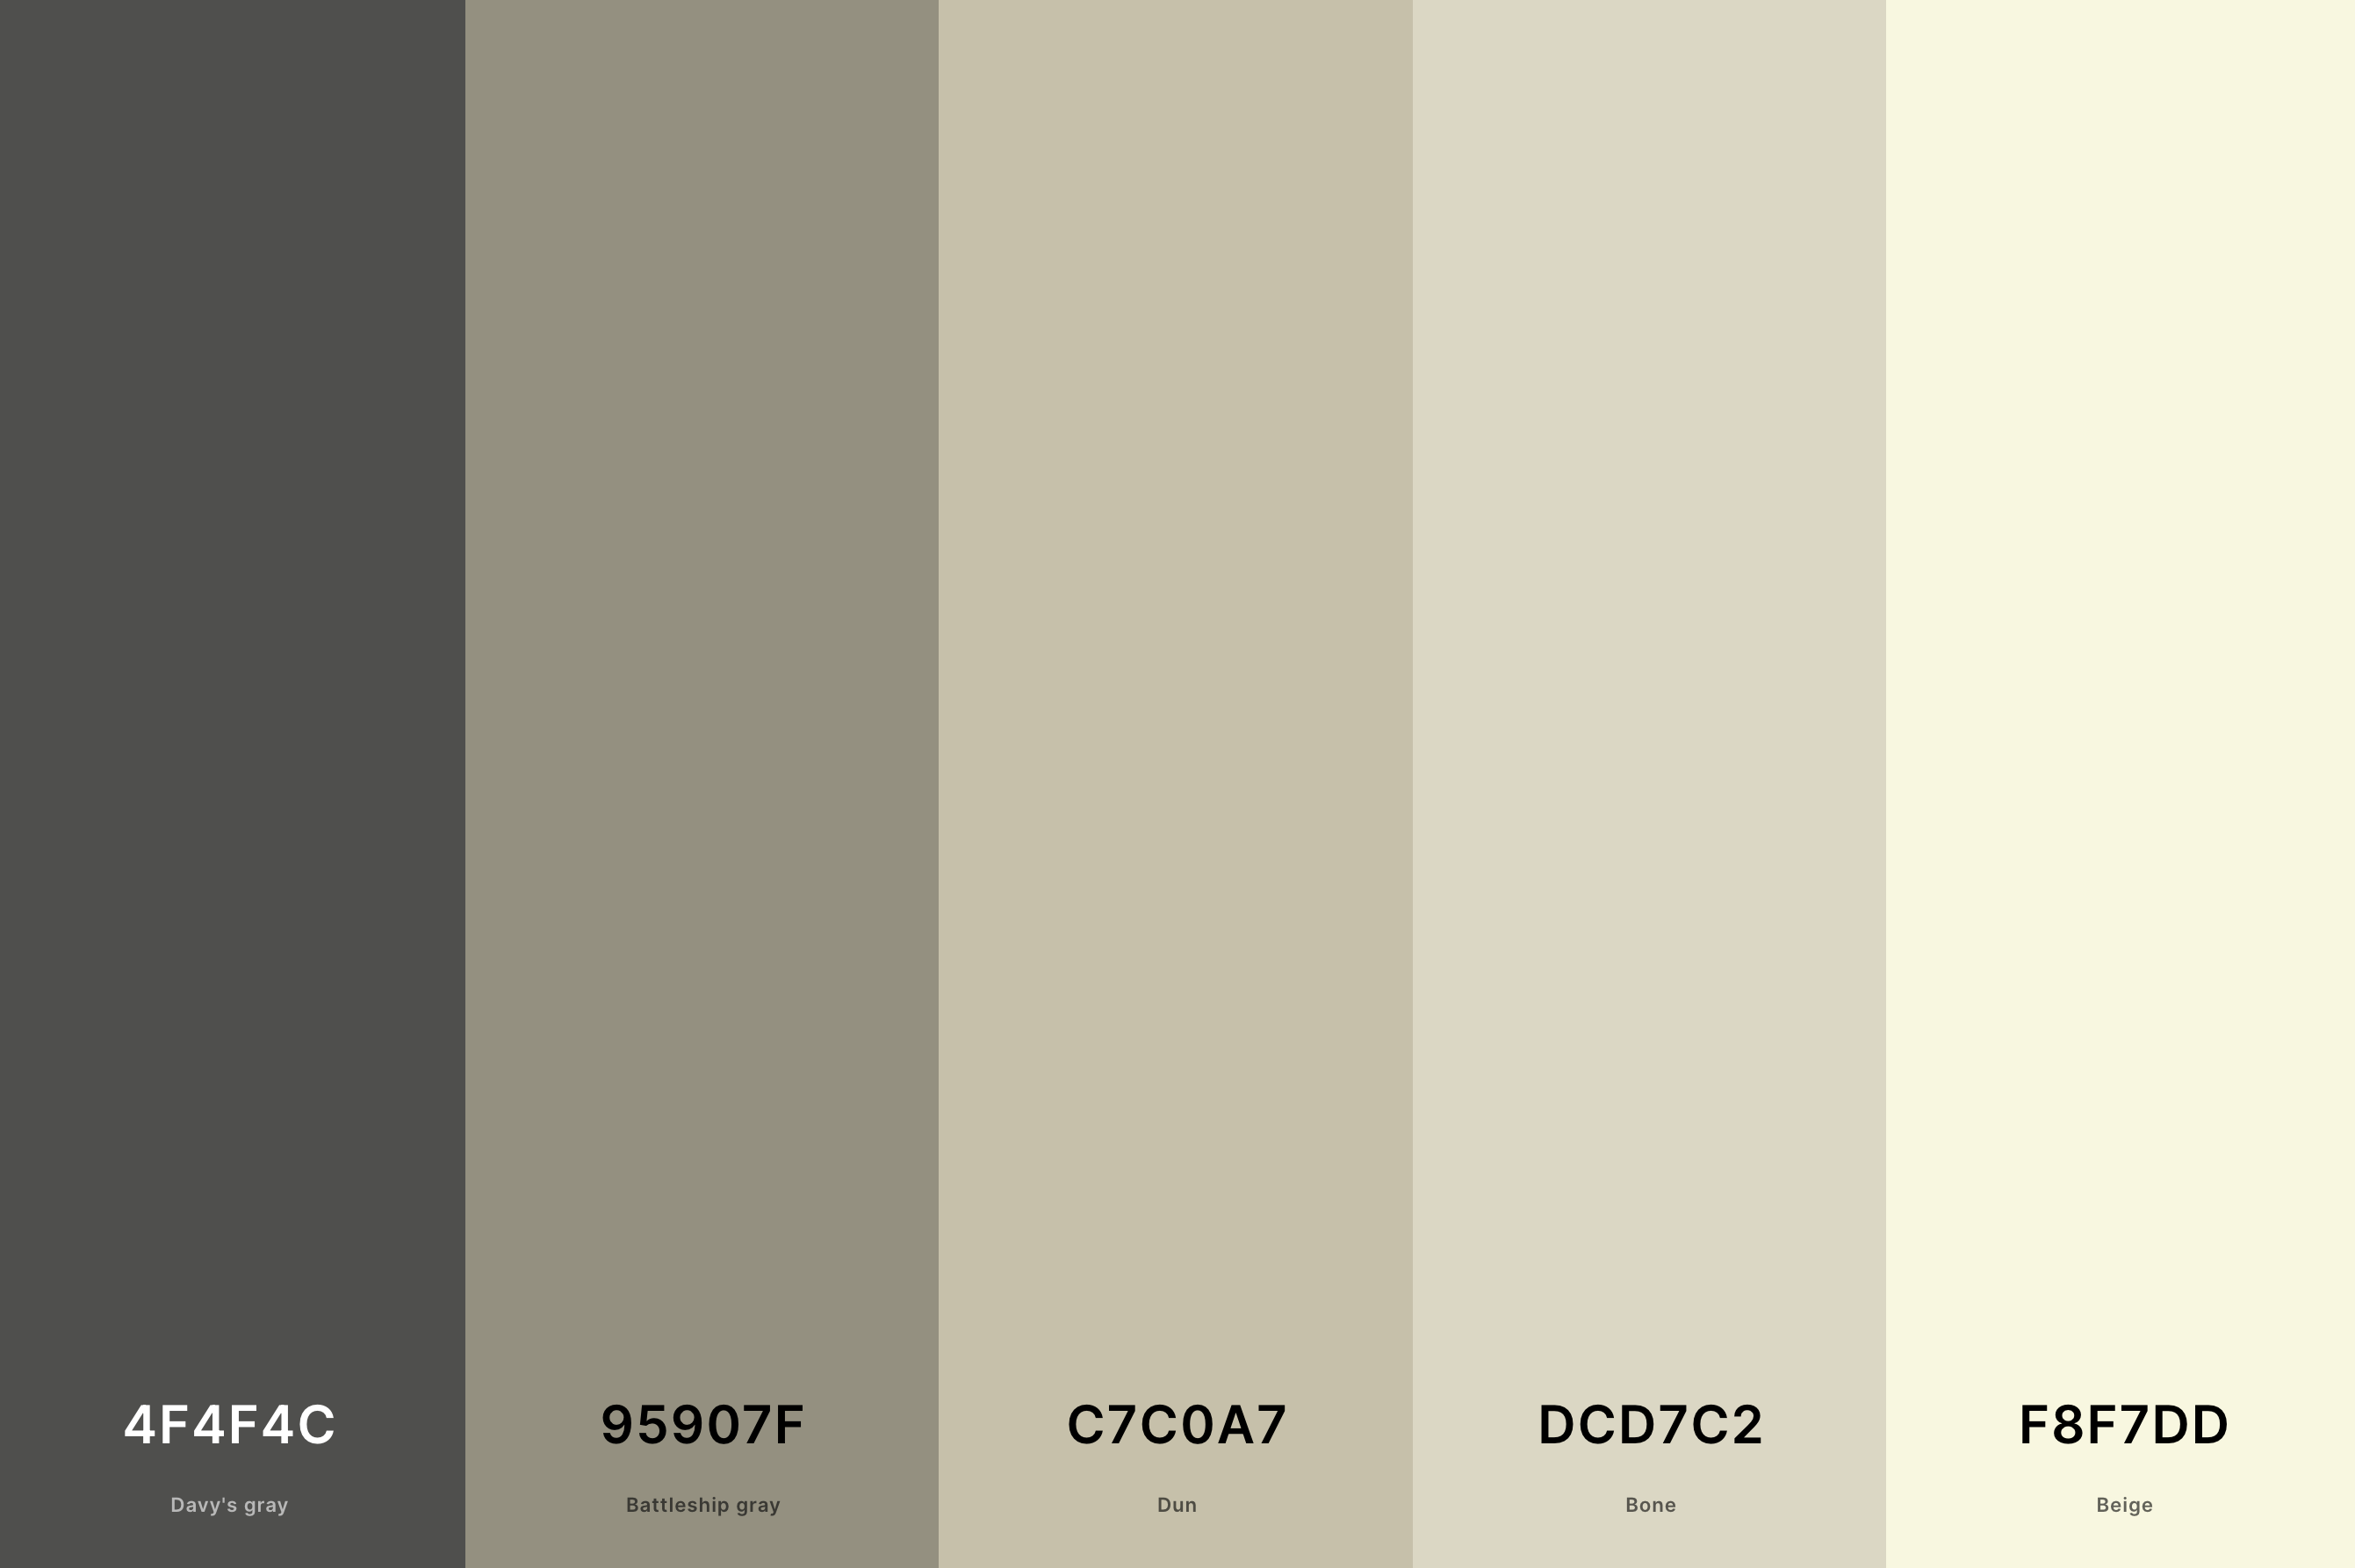 12. Cream And Grey Color Palette Color Palette with Davy'S Gray (Hex #4F4F4C) + Battleship Gray (Hex #95907F) + Dun (Hex #C7C0A7) + Bone (Hex #DCD7C2) + Beige (Hex #F8F7DD) Color Palette with Hex Codes